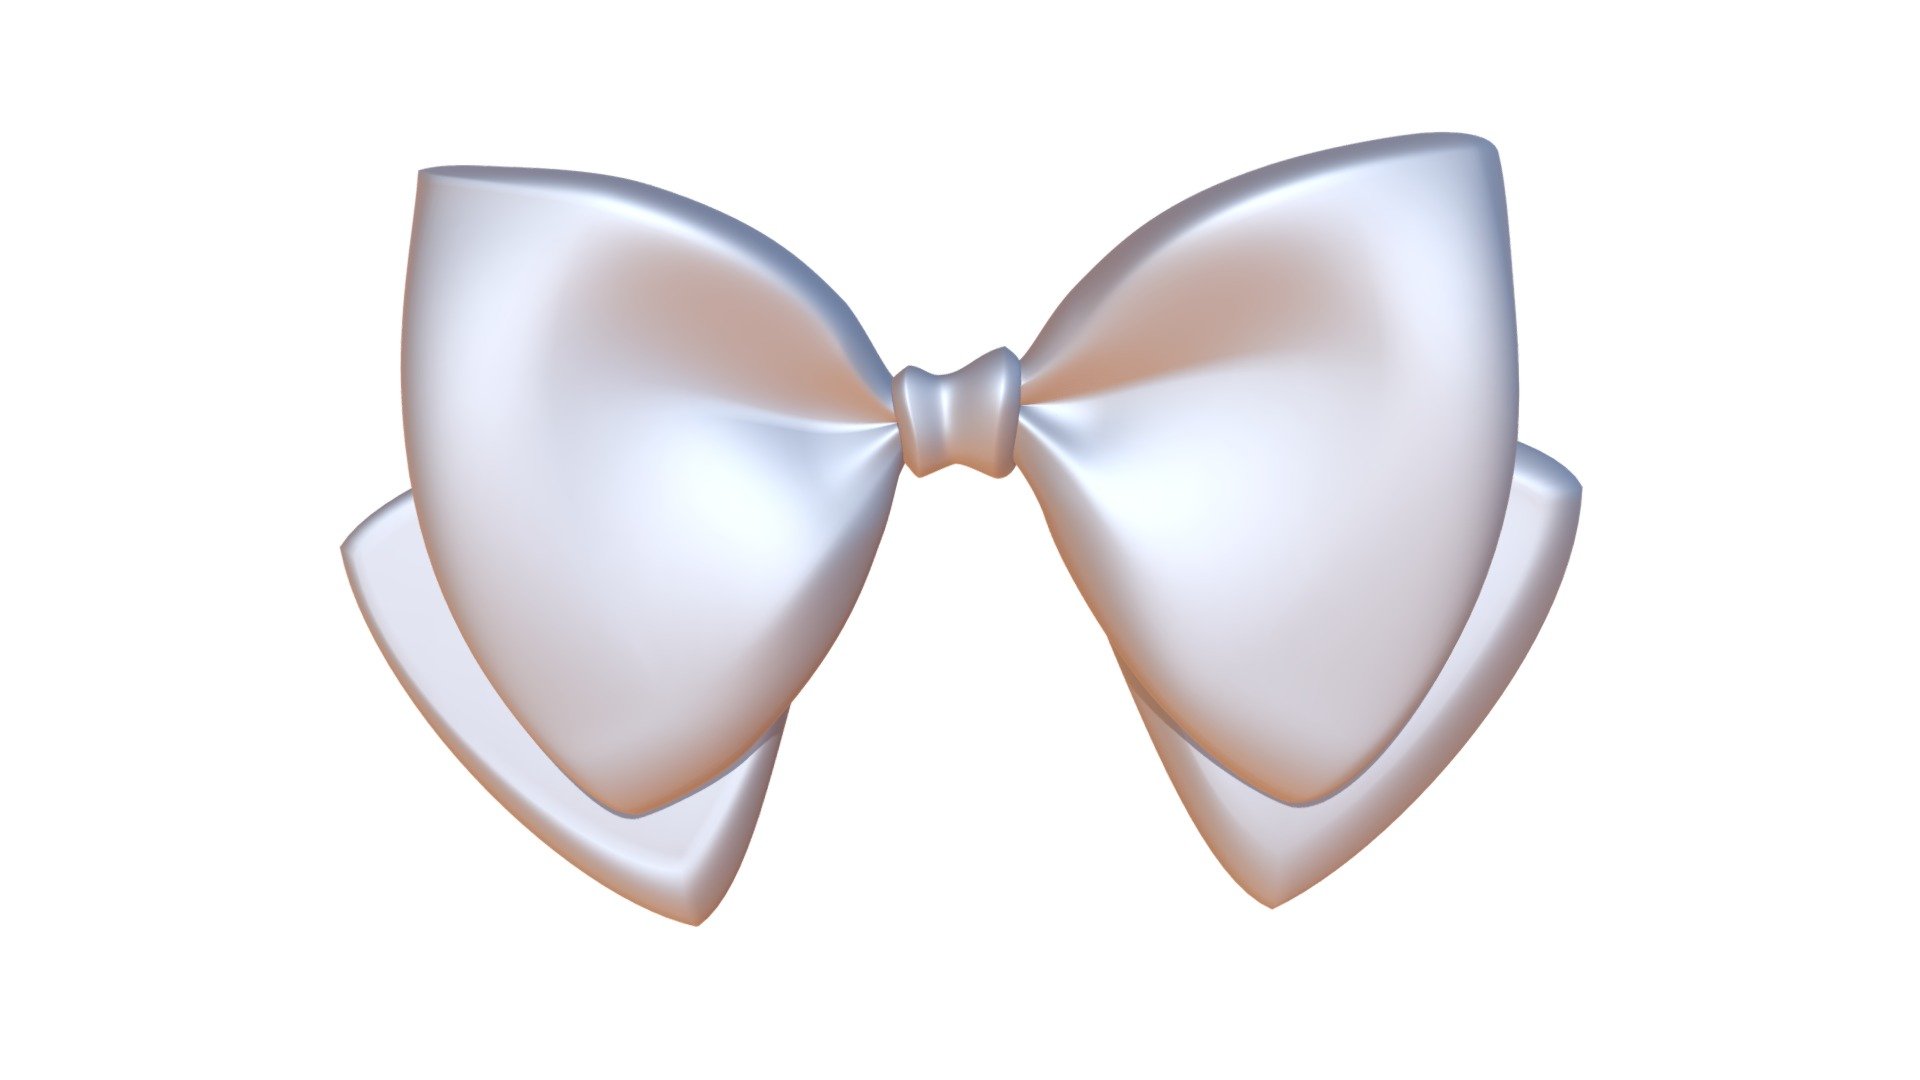 Highpoly hardsurace bow model. Ready for 3D-print or CNC, or just a render. Size: 51 x 5 x 33 mm. Volume: 3,4 cm3 3d model